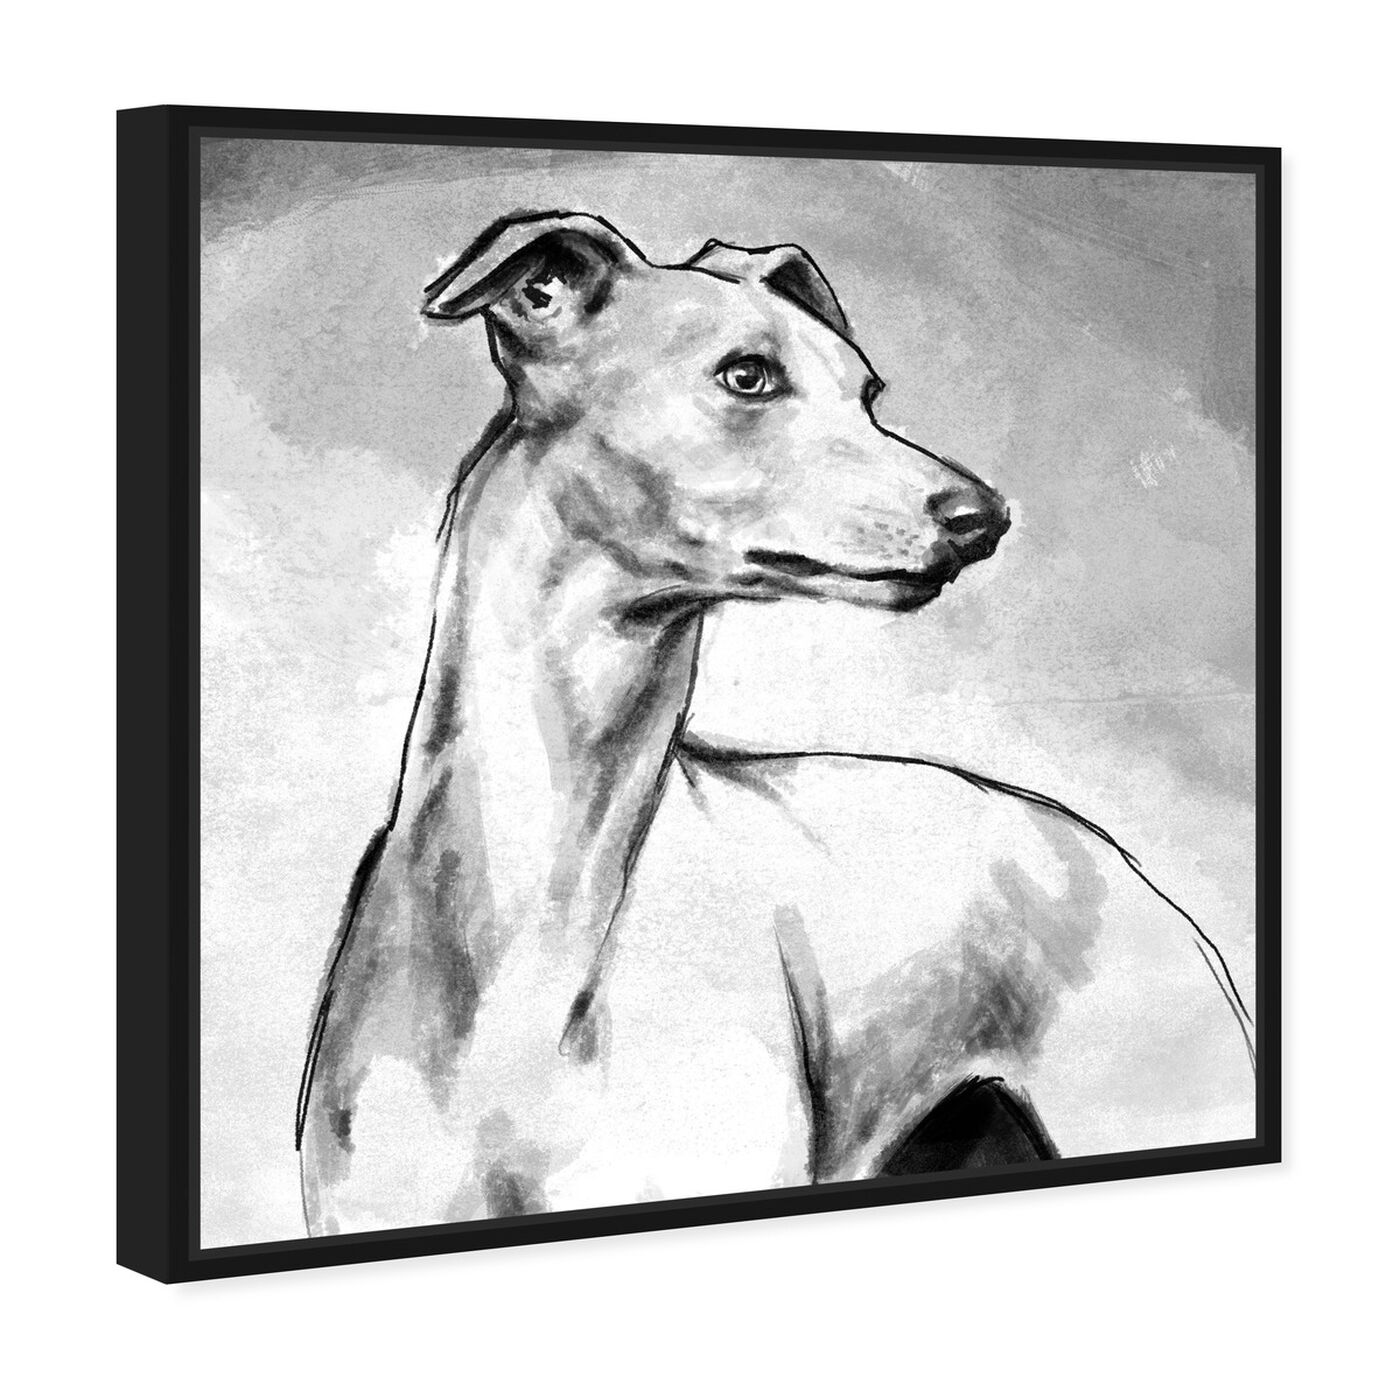 Angled view of Galgo featuring animals and dogs and puppies art.